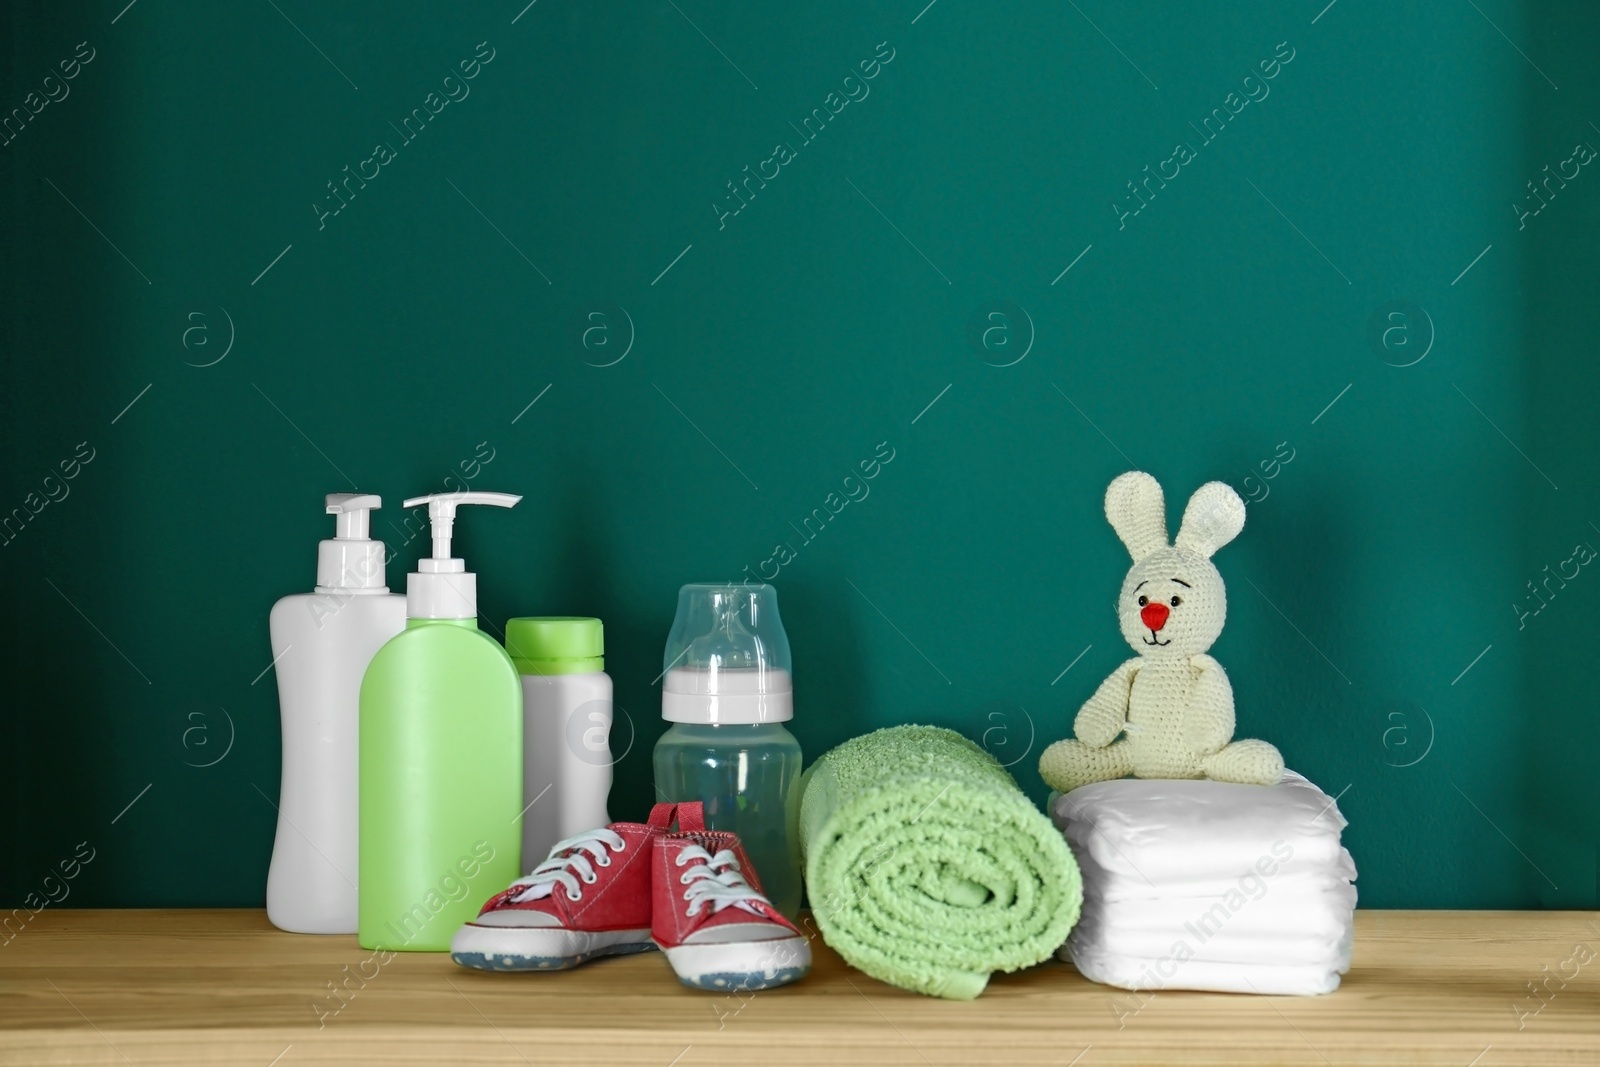 Photo of Bathroom accessories and toy for baby room interior on wooden table near turquoise wall